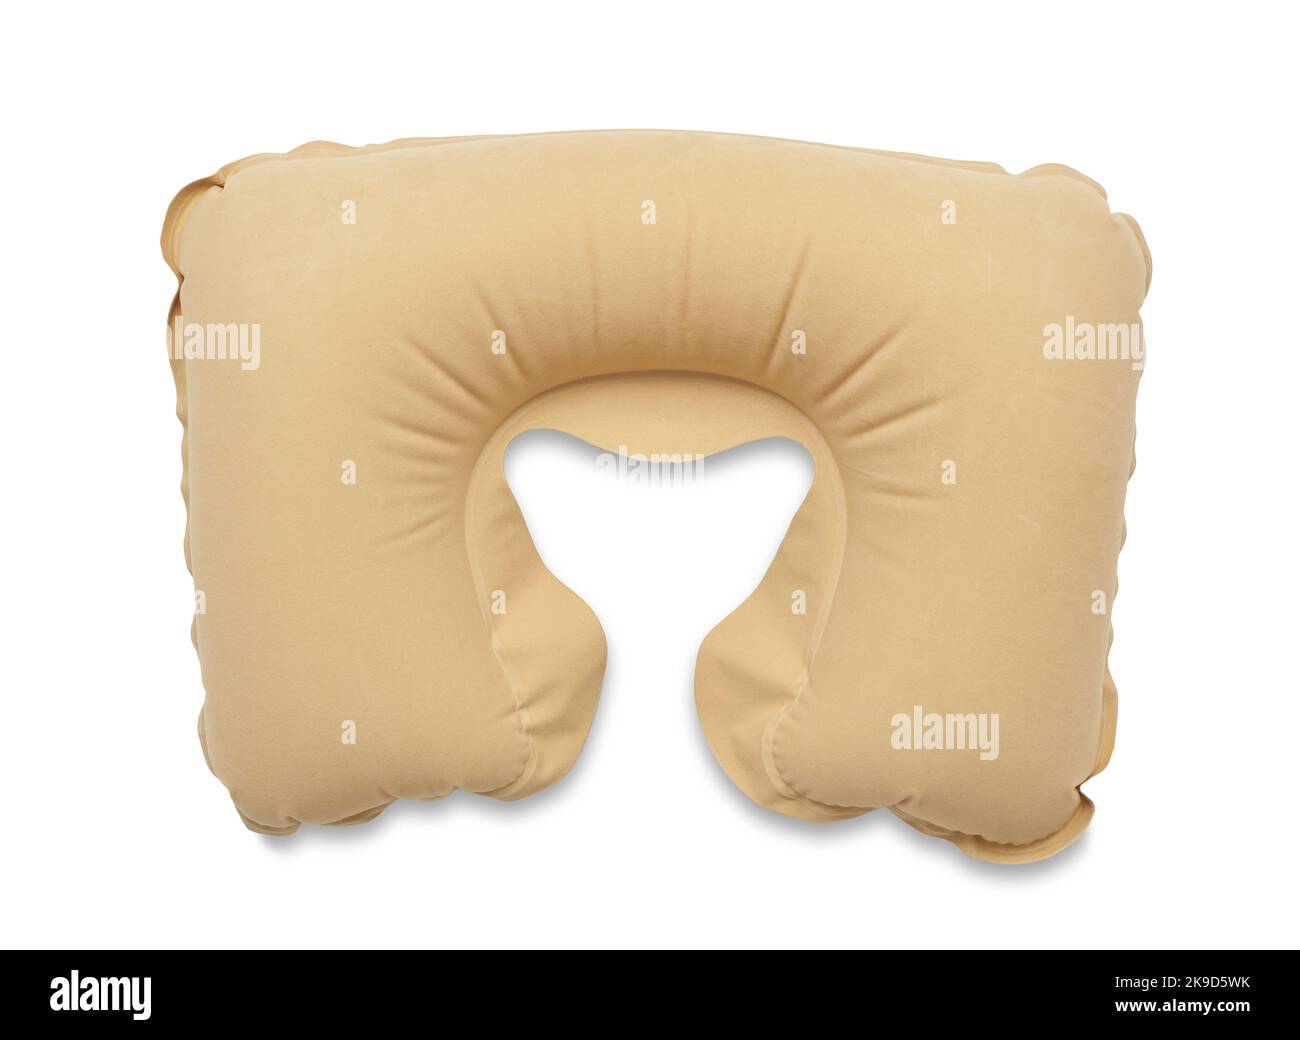 Inflatable neck pillow on a white background for relaxing in an airplane. Stock Photo